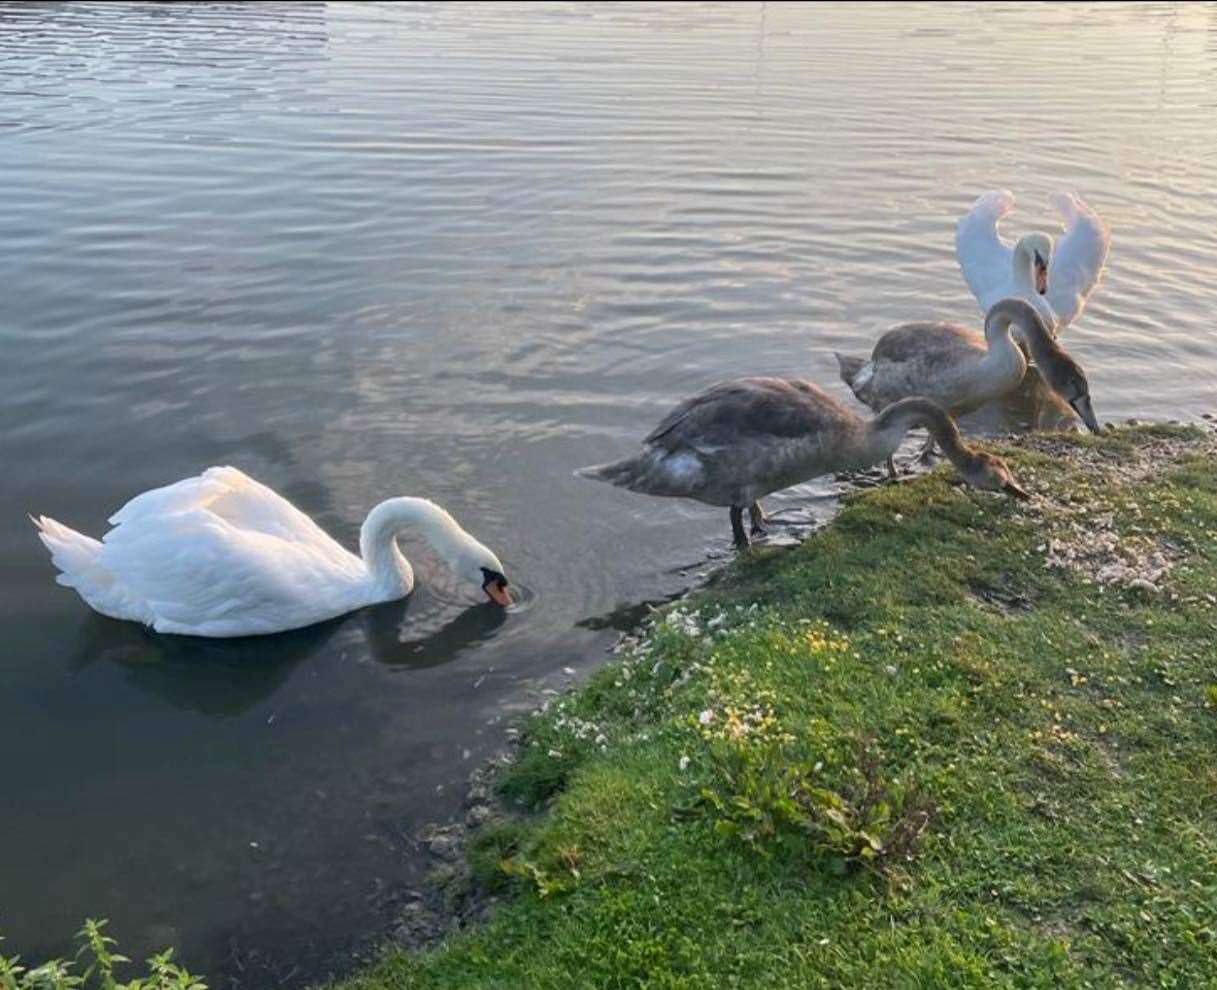 'Sidney' was reunited with his pen and cygnets in Greenhithe